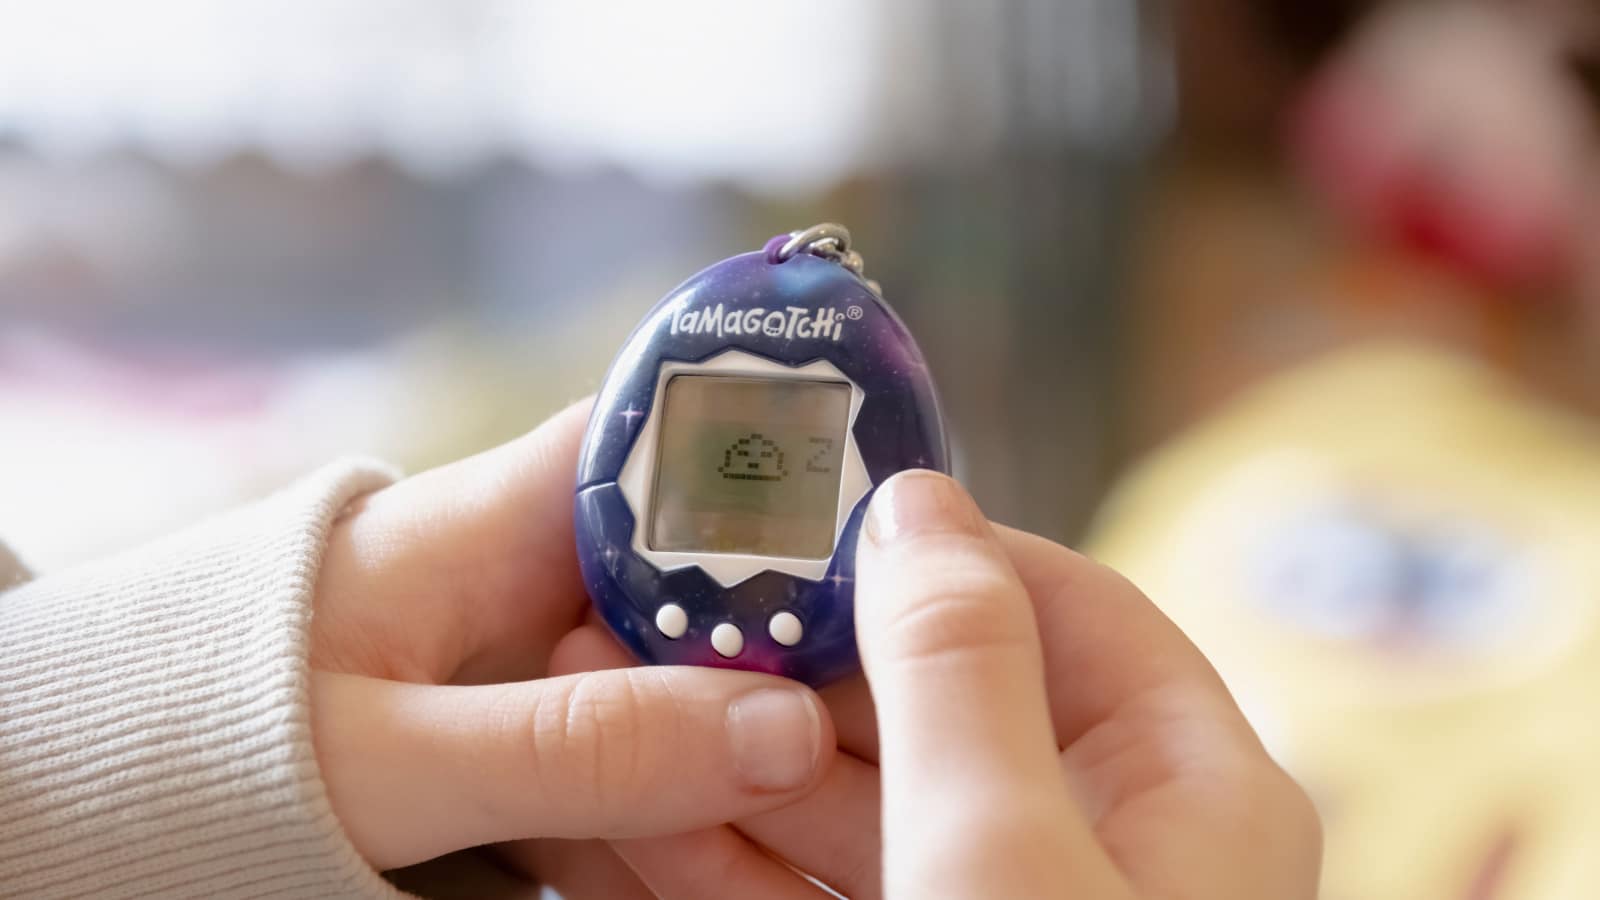 BARI, ITALY - MARCH 19, 2023: a kid playing with a Tamagotchi (portable handheld digital pet video game, created in Japan). Closeup of the creature sleeping.